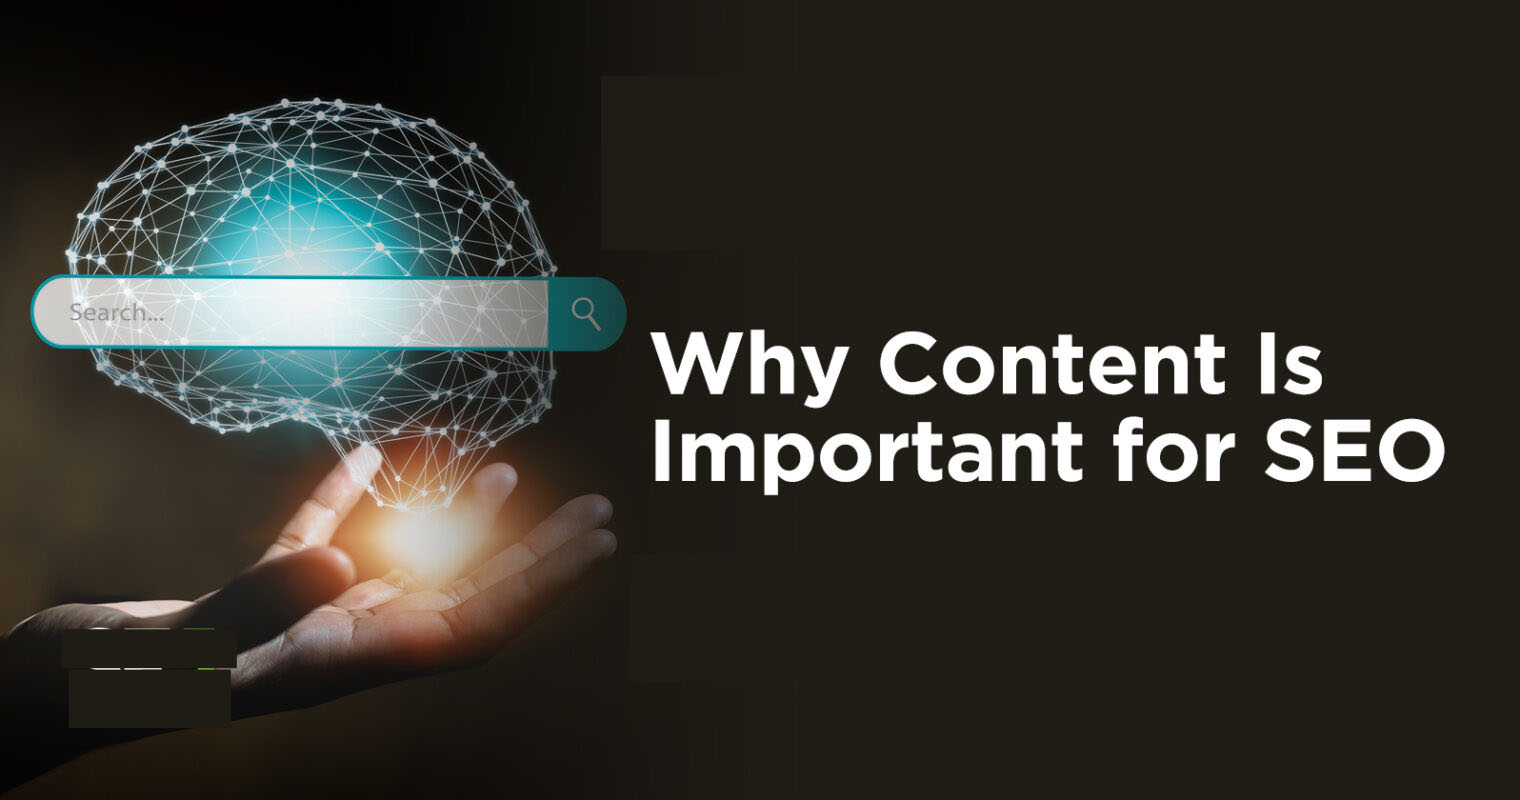 Why Is Content So Important For SEO?